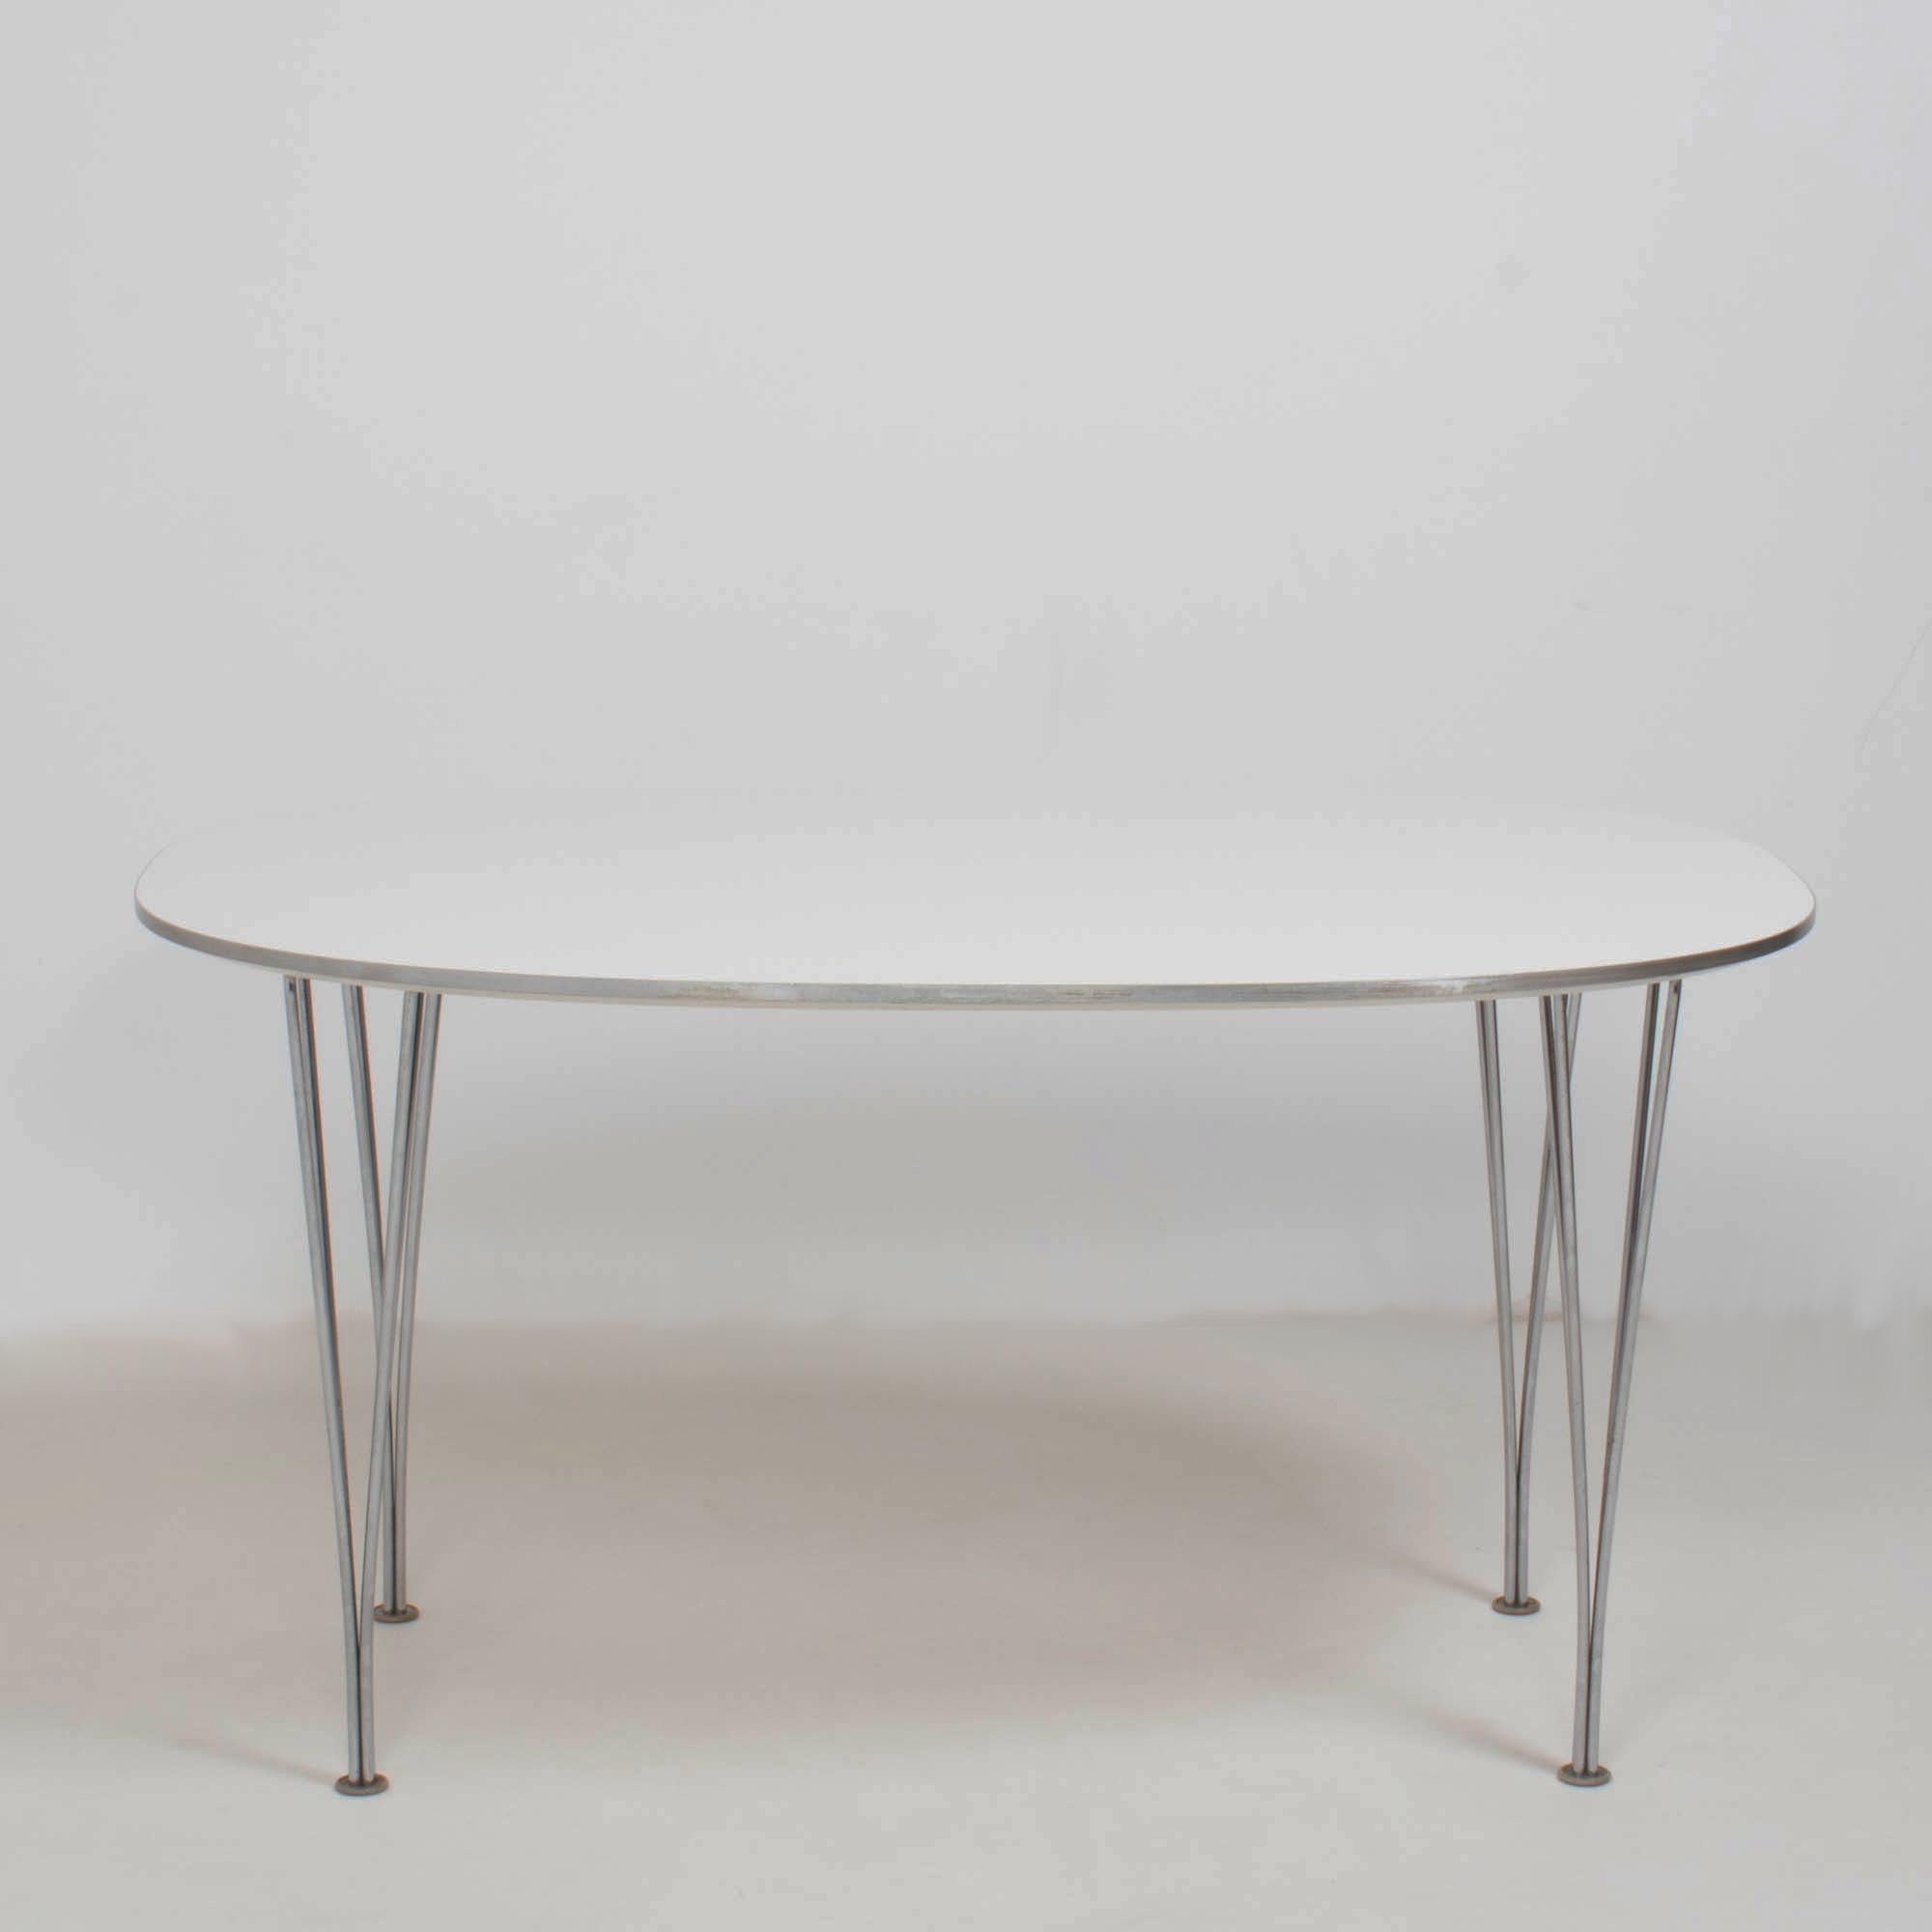 Originally designed by Piet Hein and Bruno Mathsson in 1966, this Super-Ellipitic table remains a contemporary piece of design.

Constructed with a white wood veneer top, the table sits on chromed steel legs and features rounded corners to create